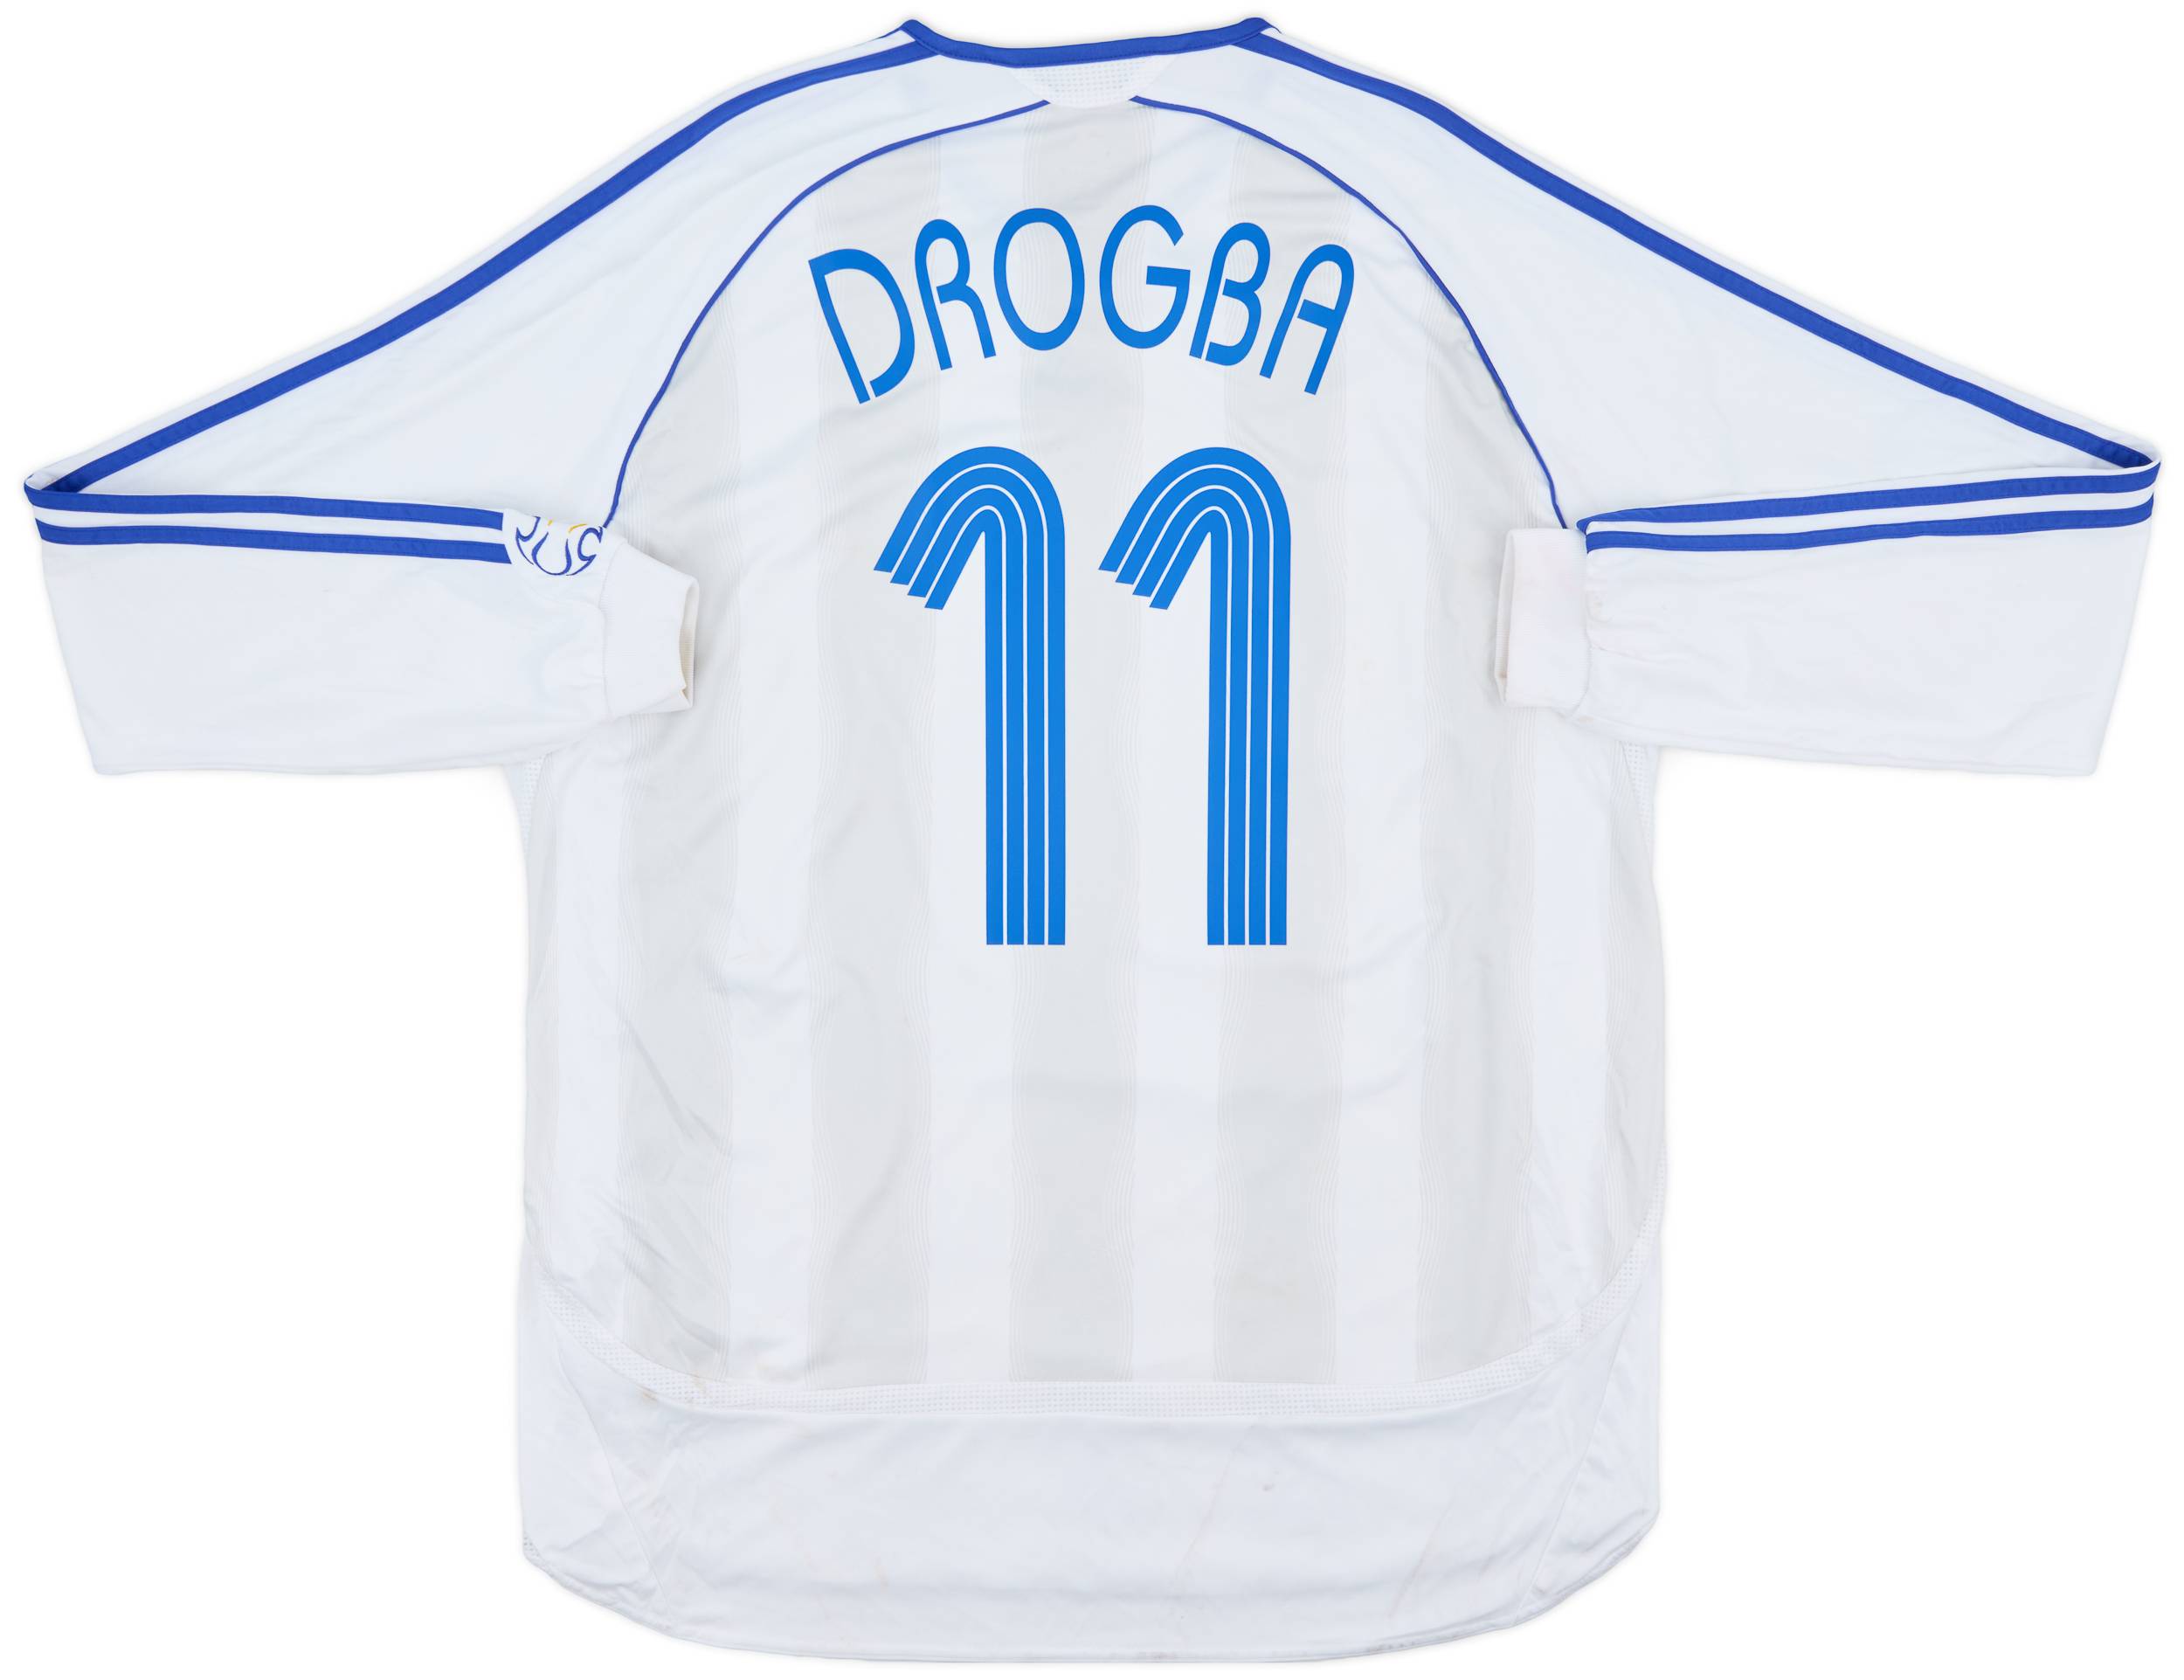 2006-07 Chelsea Player Issue Away L/S Shirt Drogba #11 - 5/10 - (XL)